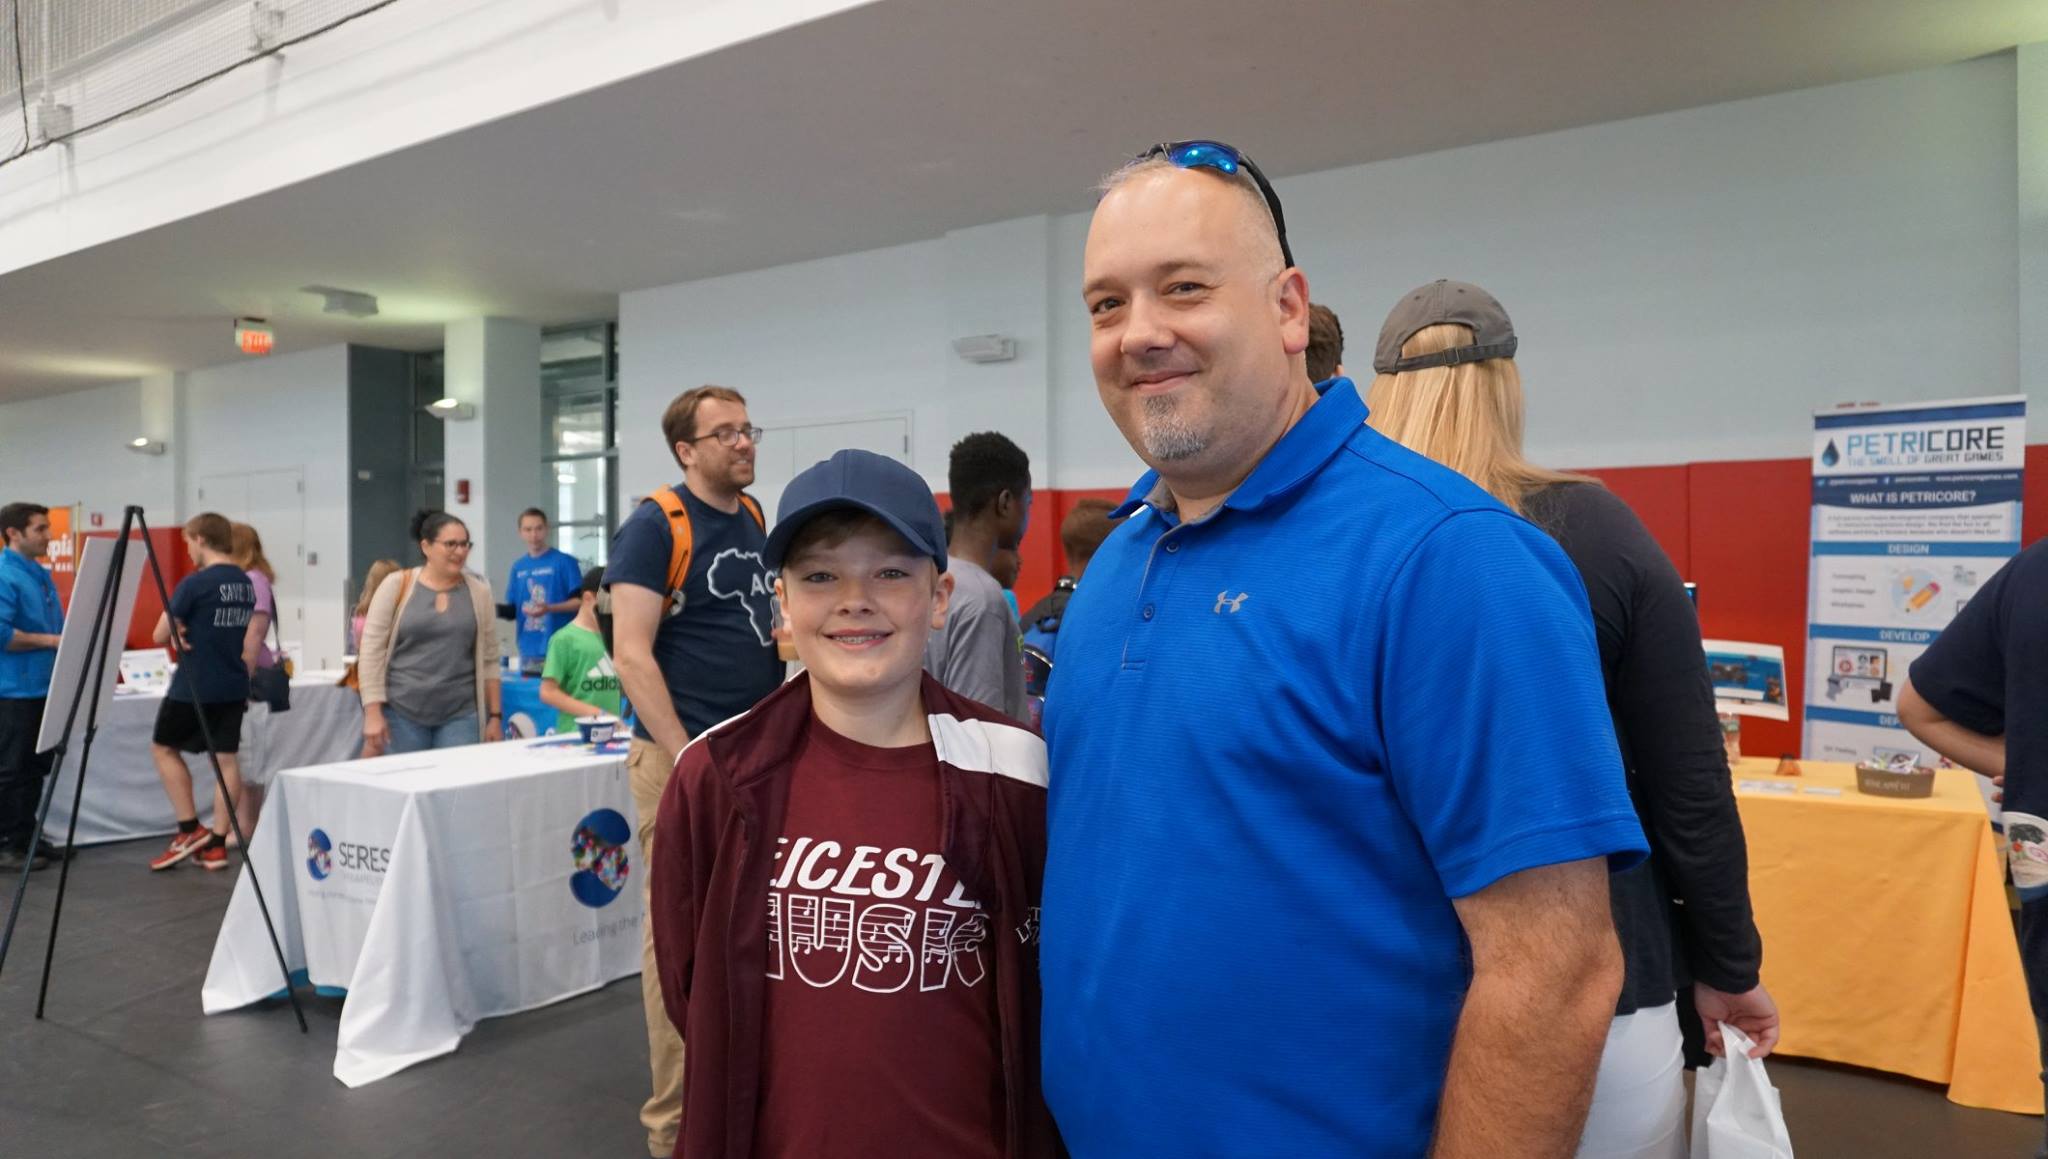 A father (right) and son smile together in the Sports & Rec Center while taking a break from some of the TouchTomorrow activities.